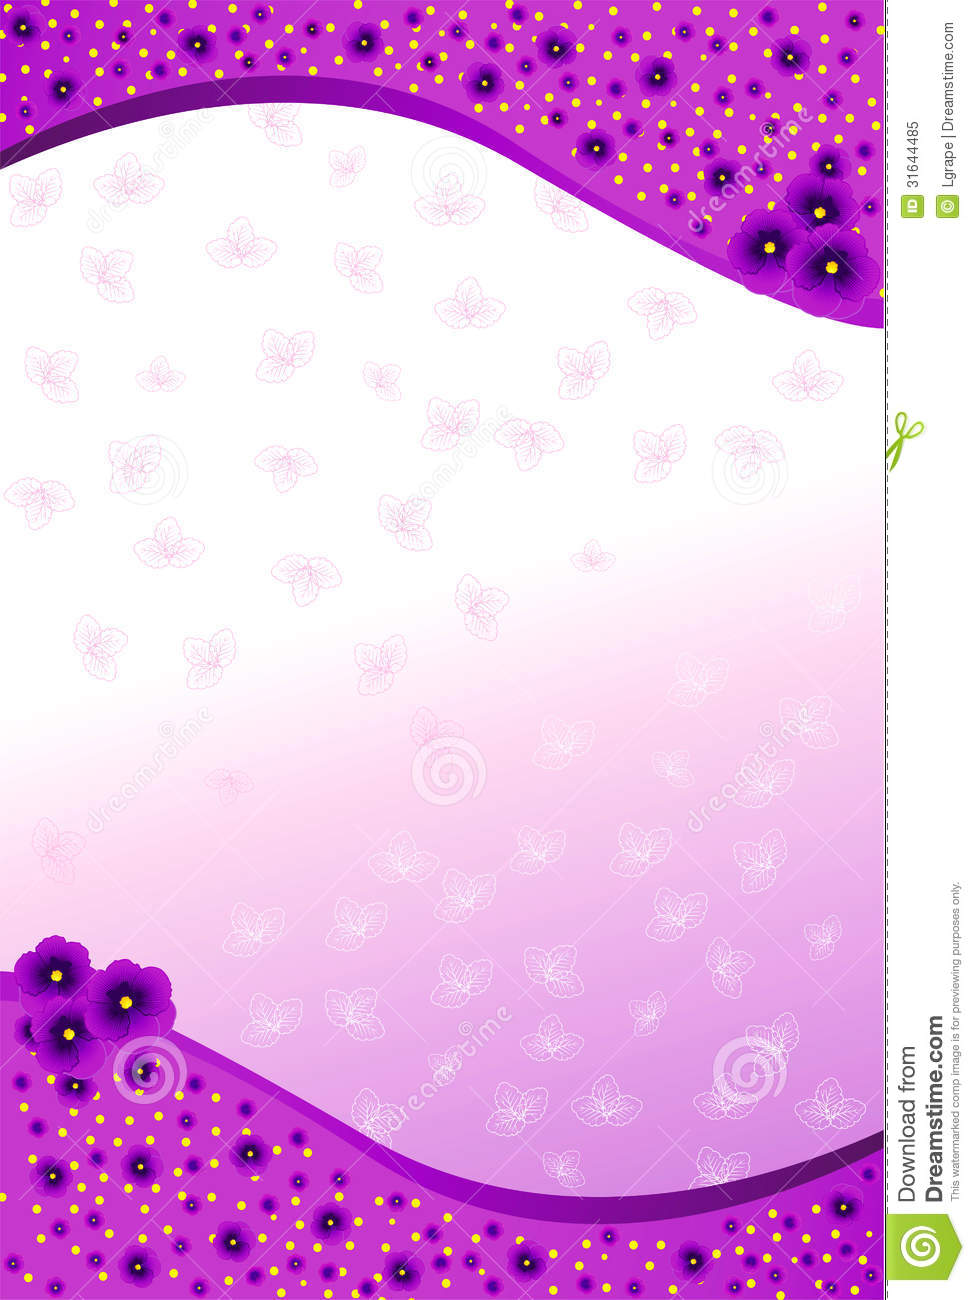 background images flowers pink #14